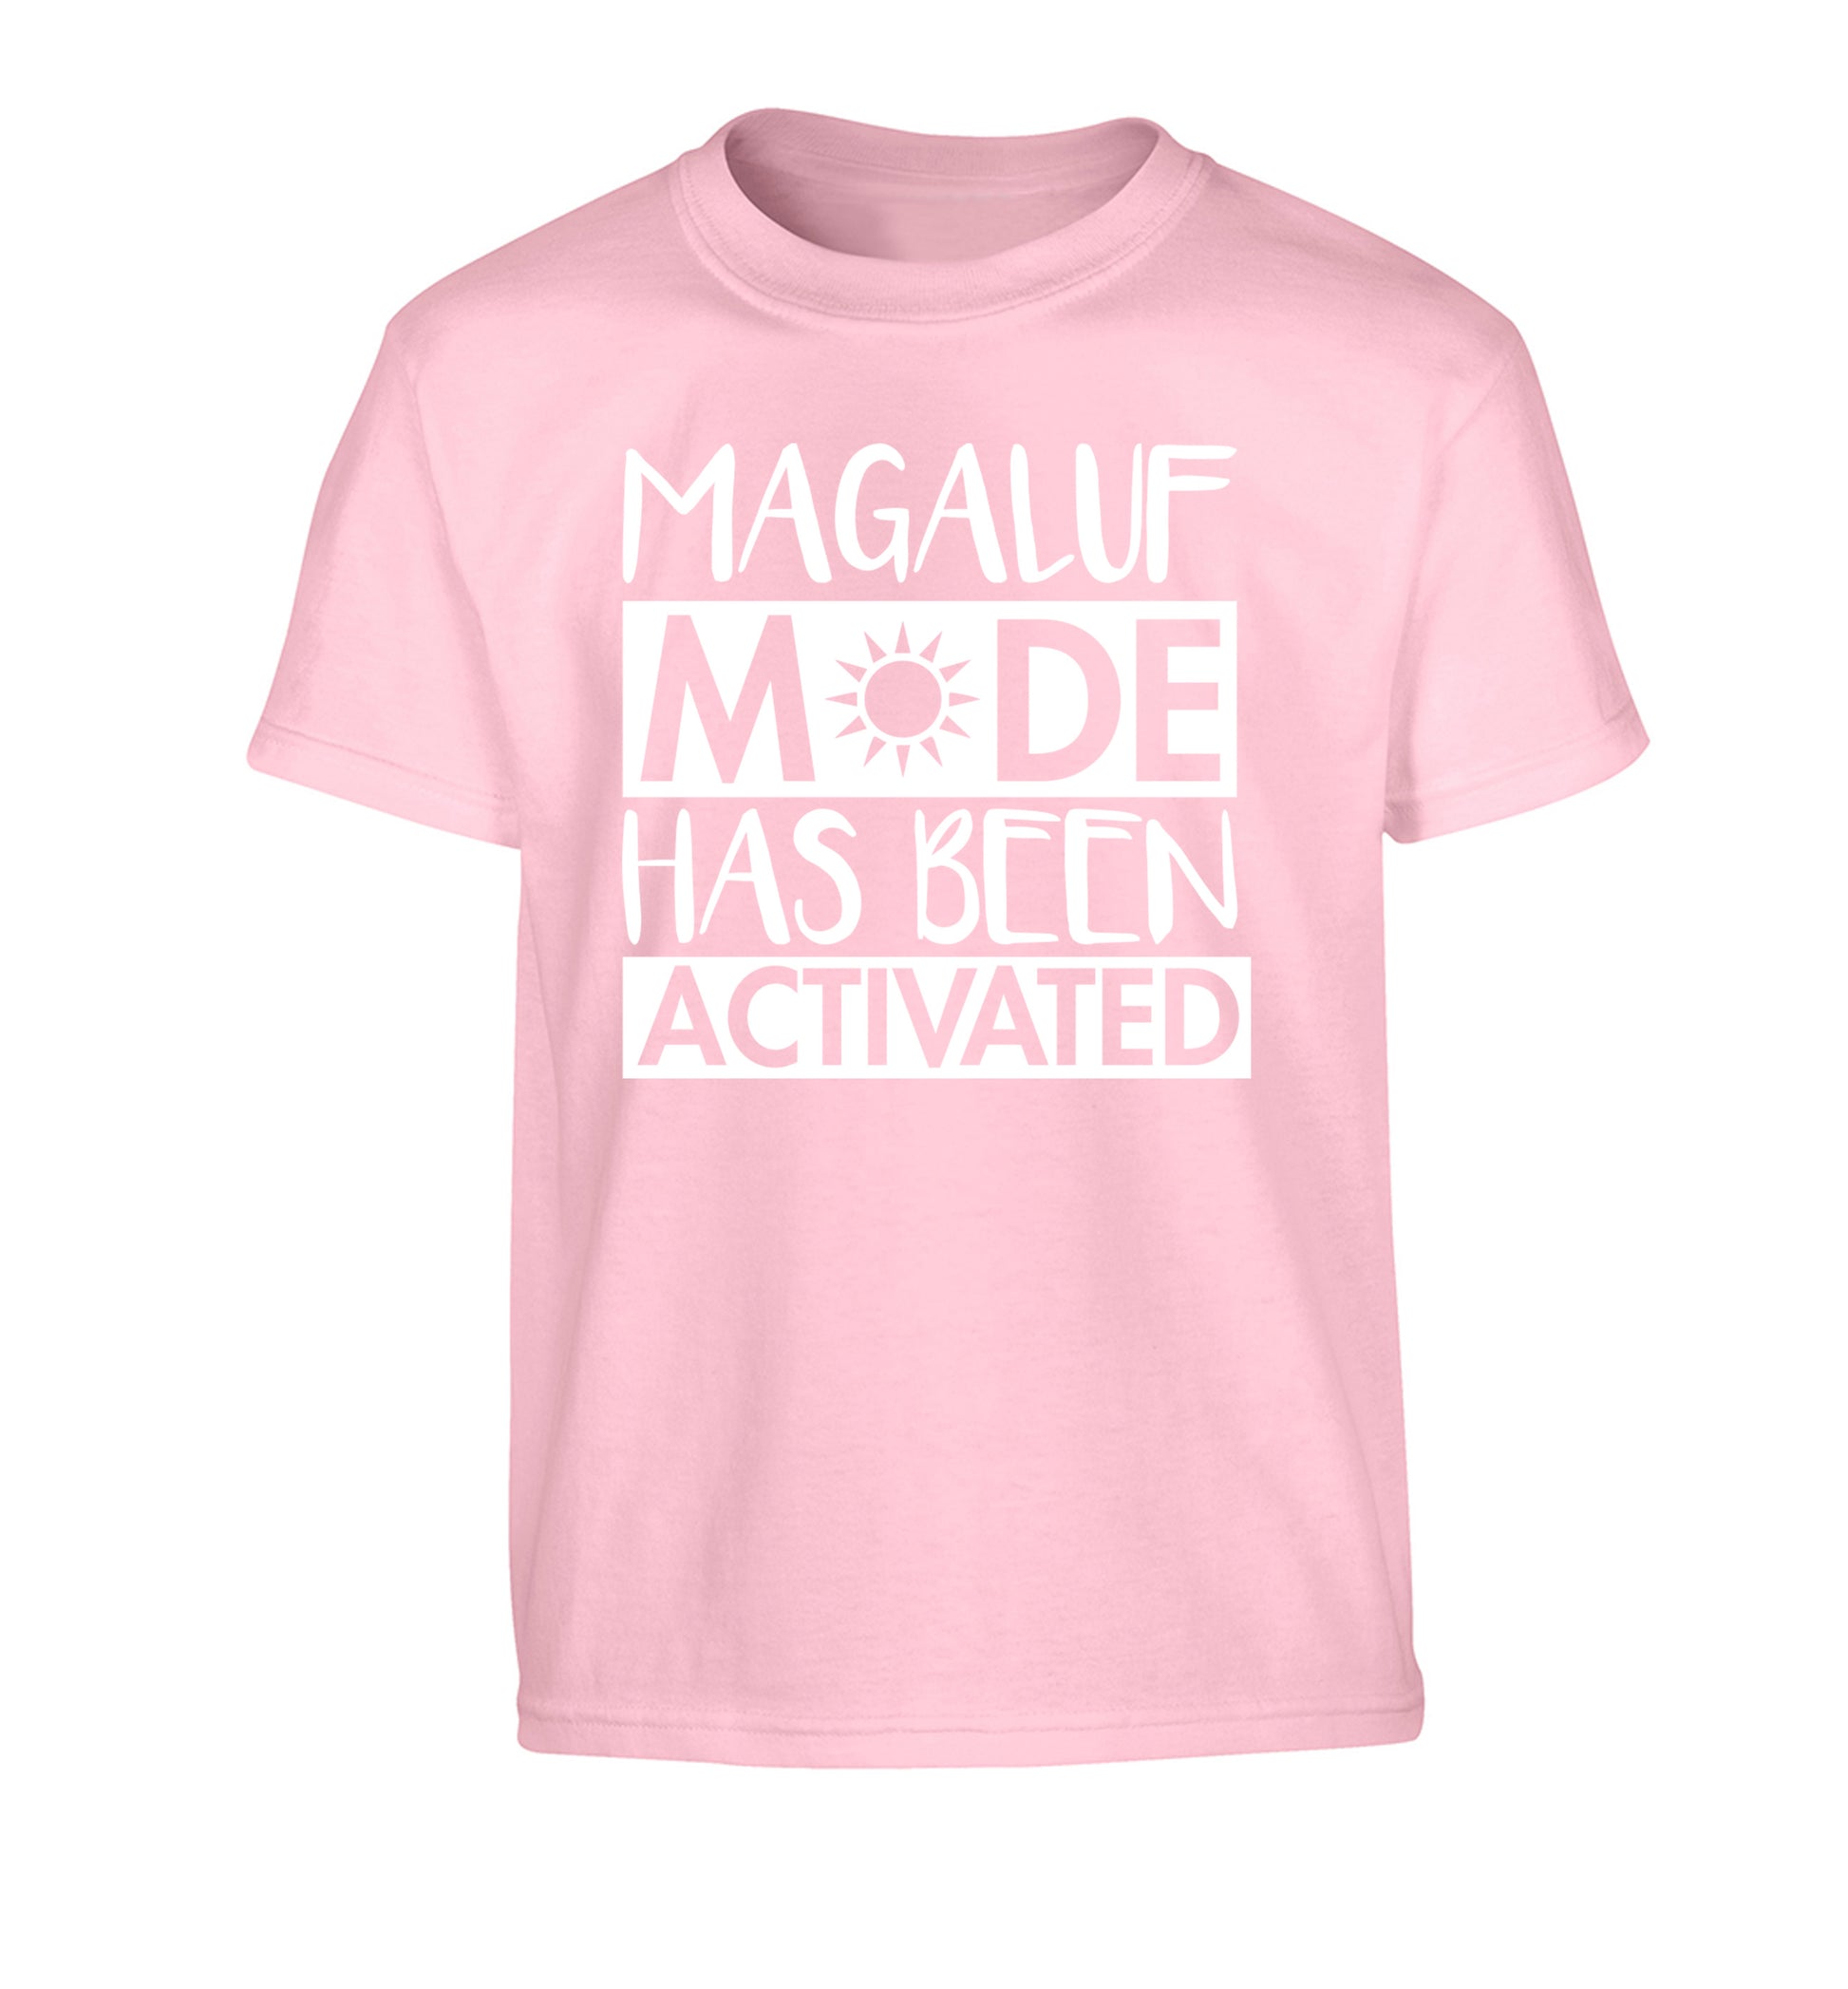 Magaluf mode has been activated Children's light pink Tshirt 12-13 Years